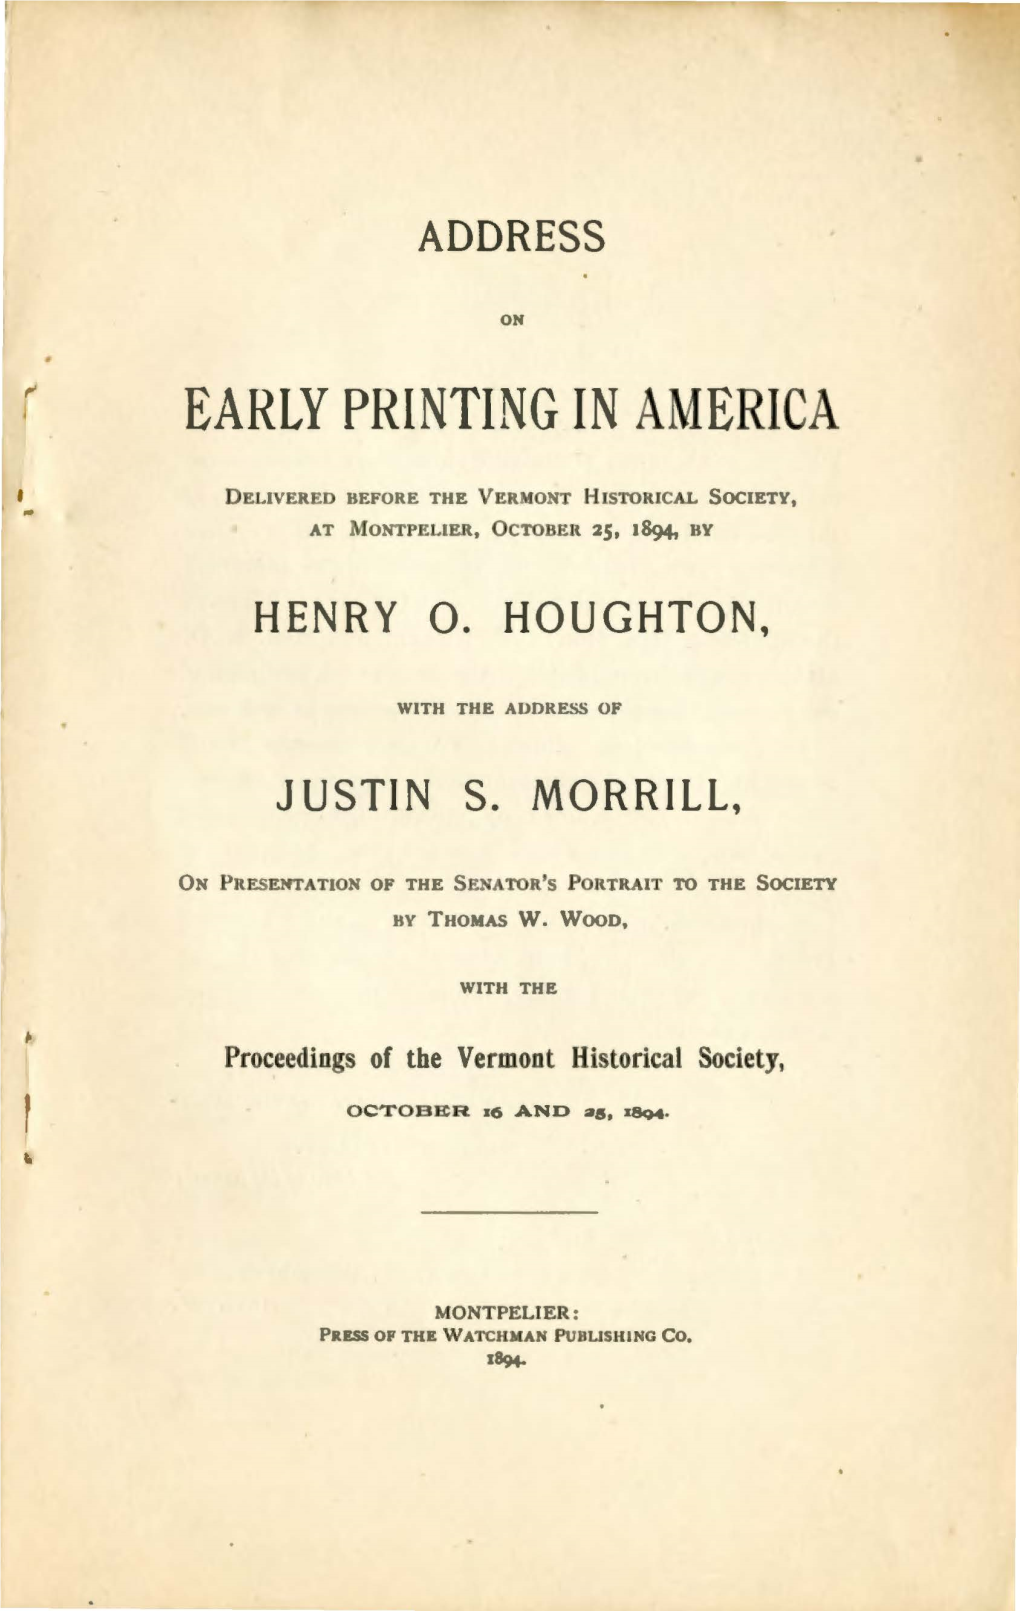 Early Printing in America